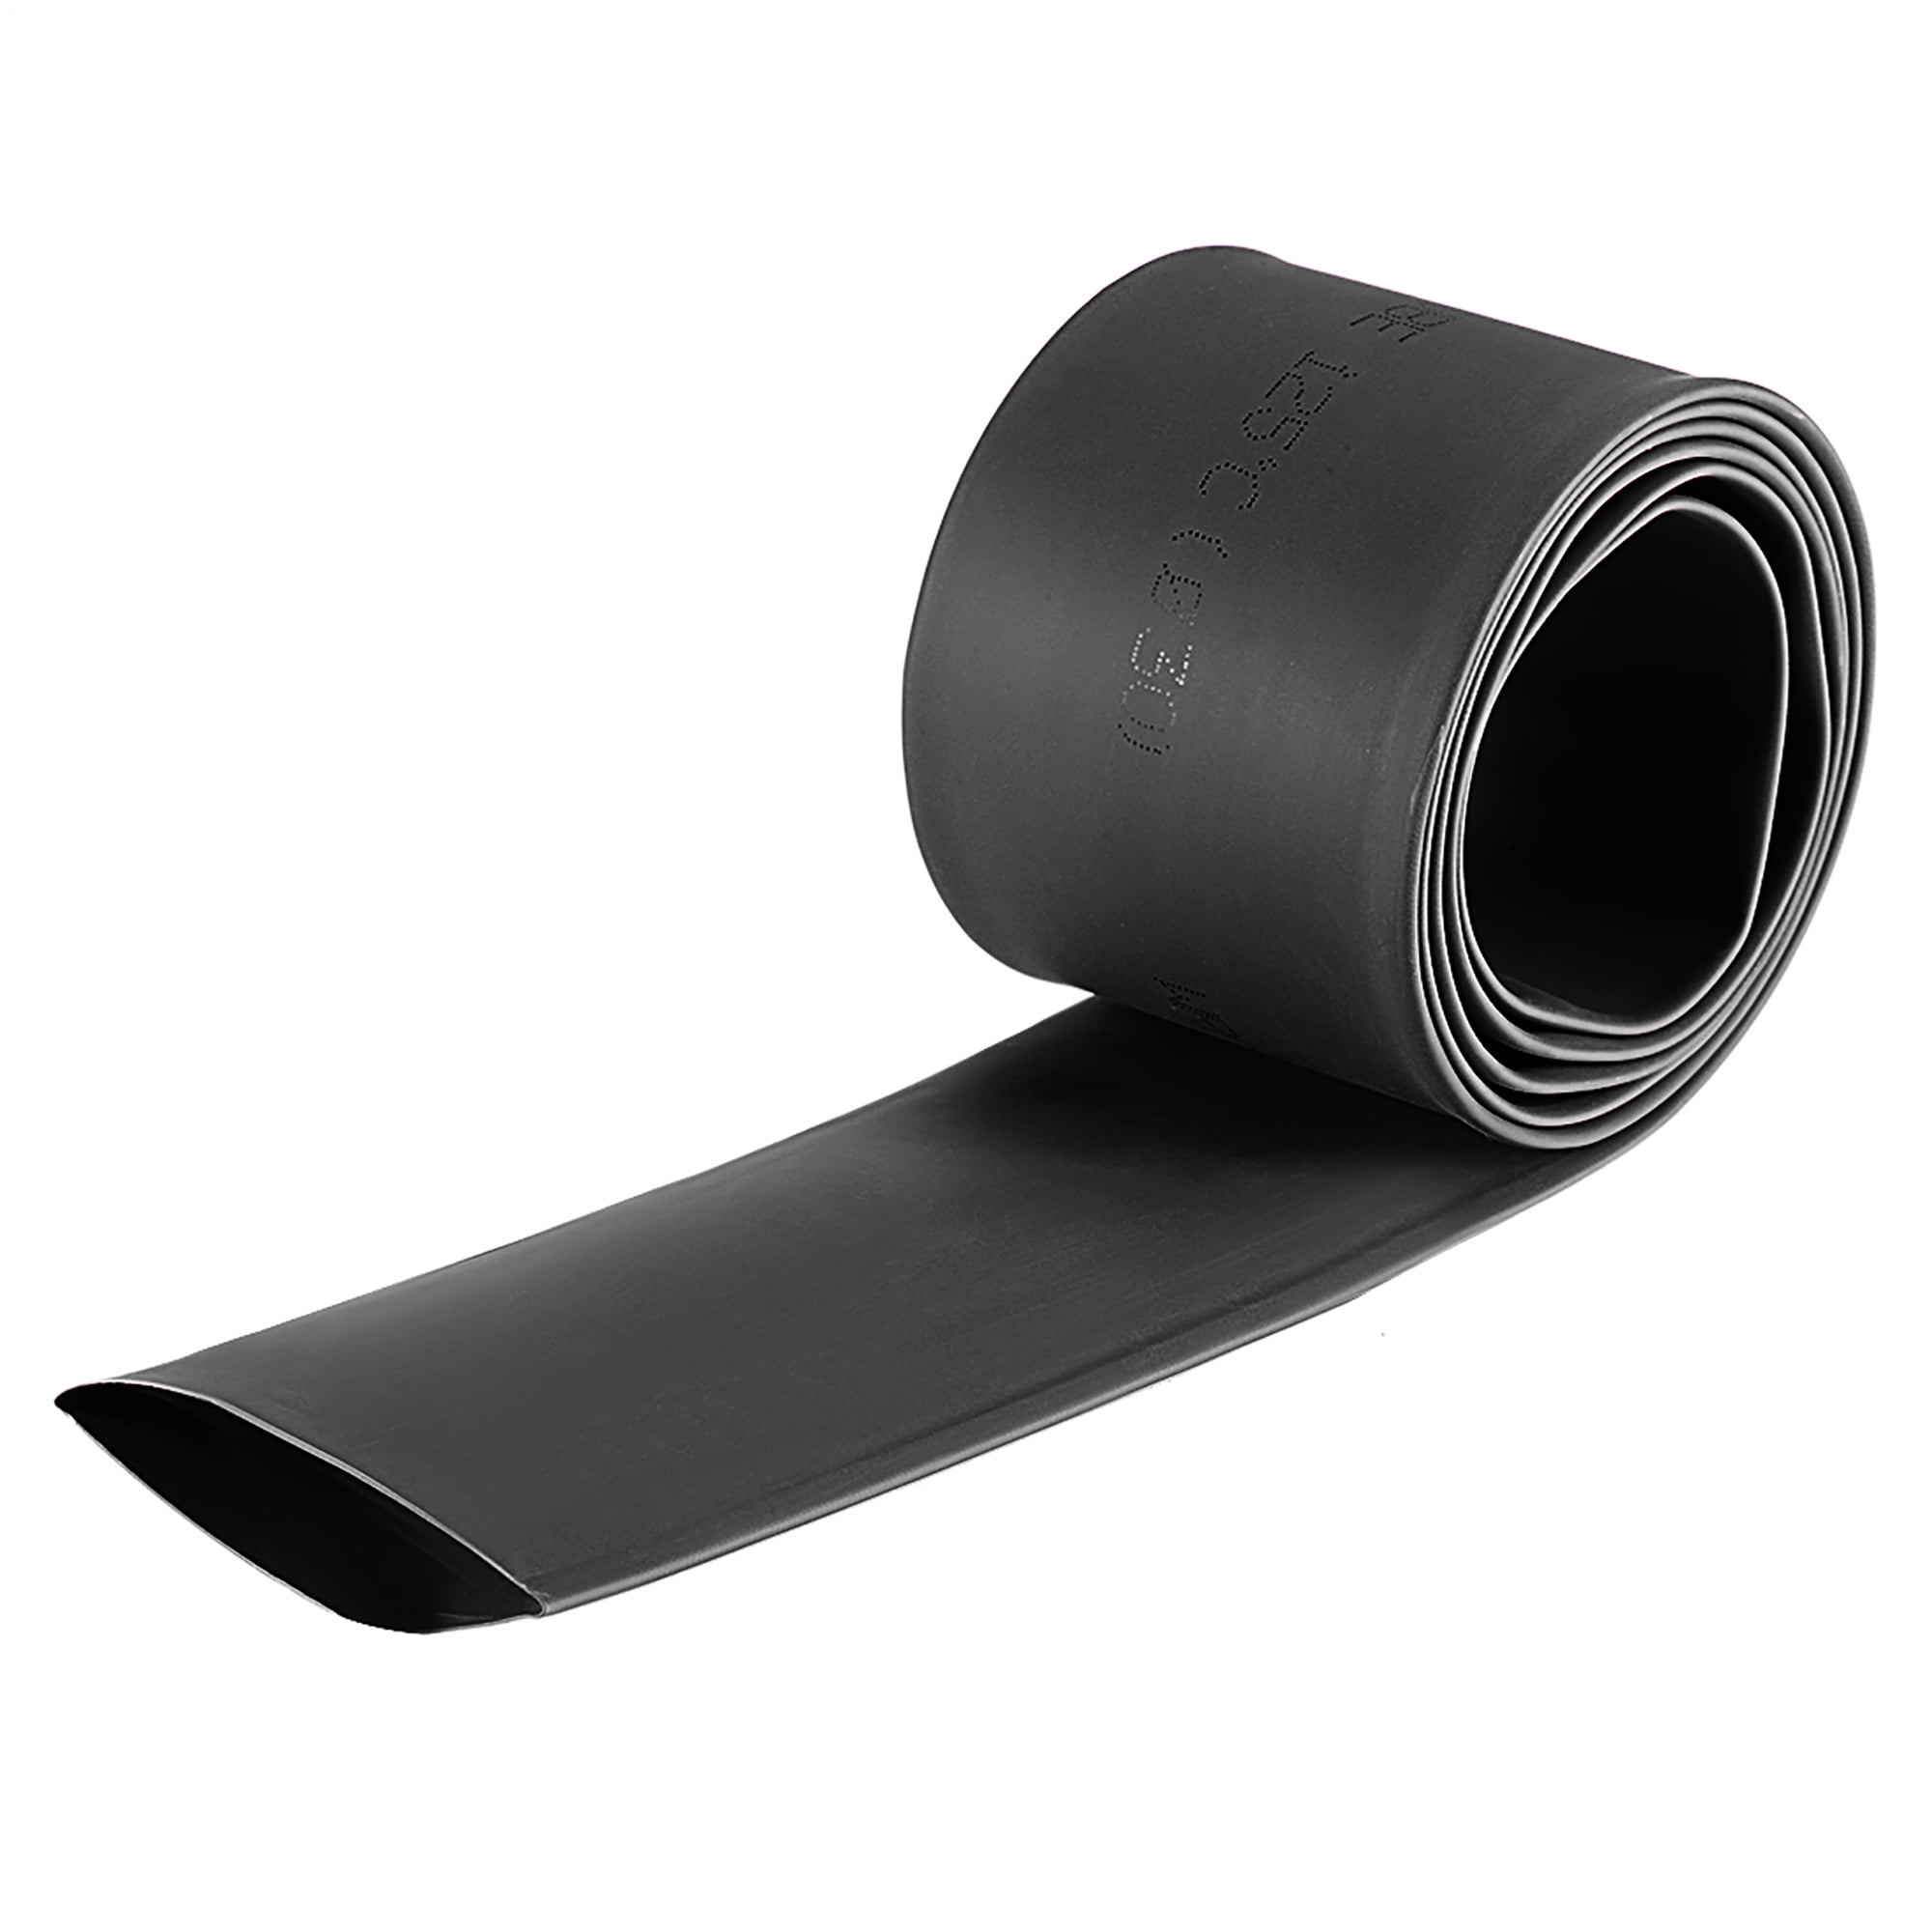 uxcell 50mm/30mm PVC Heat Shrink Tubing Black 5m 16.4ft for 2 x 18650 Battery 